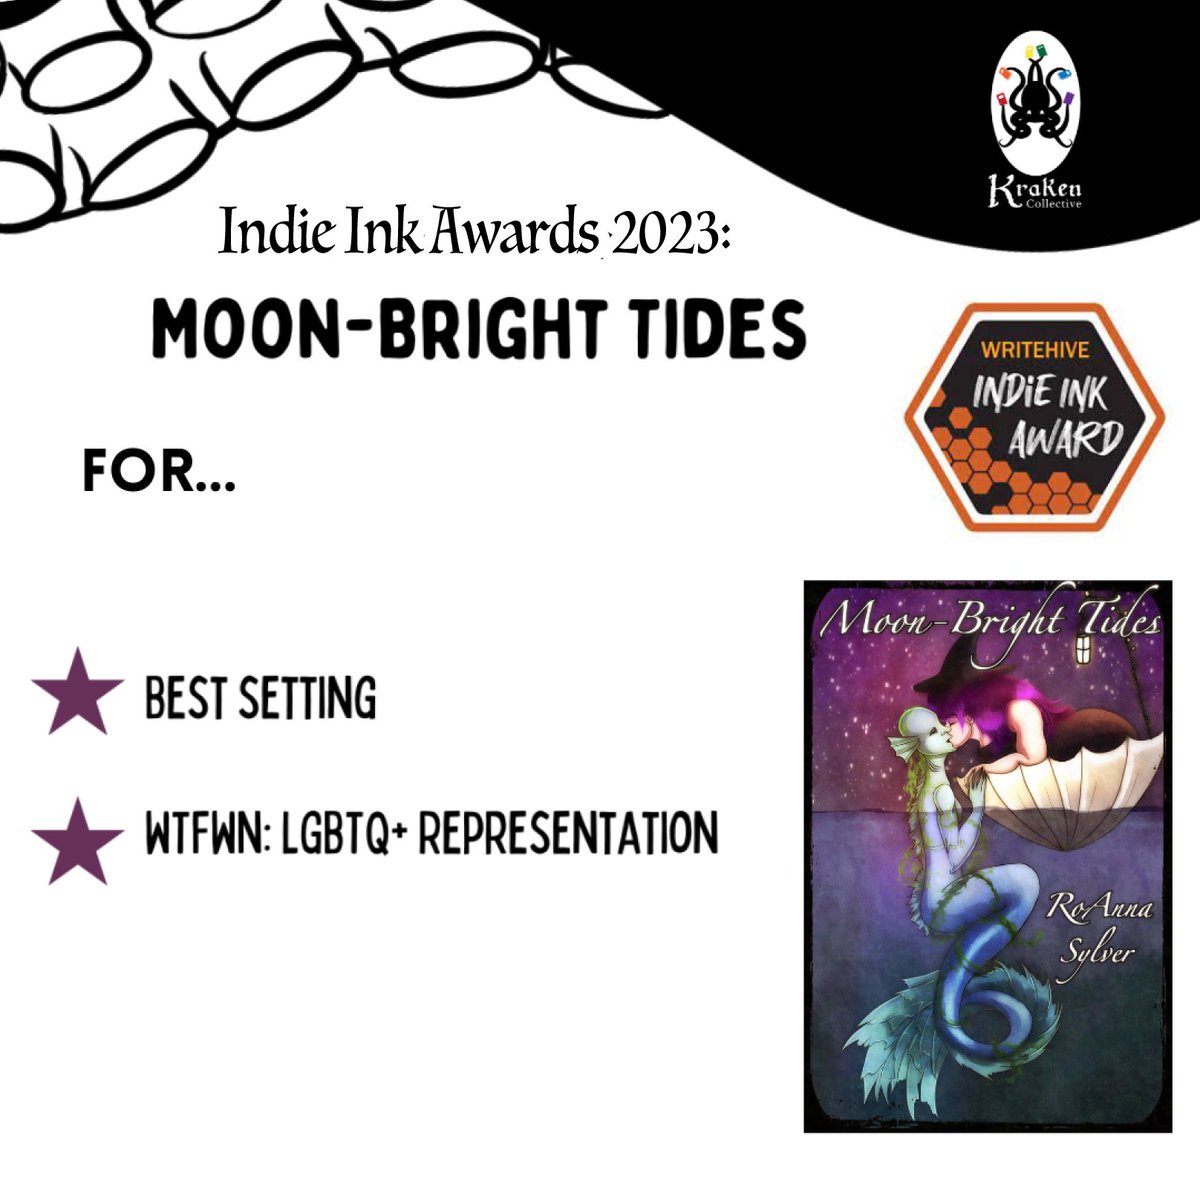 Super exciting news, y'all! :D The Indie Ink Awards voting period is now open, and my weird queer books scored several nominations! I'm so overwhelmed and happy ;A; Learn more/vote below! (There are SO MANY incredible indies, including fellow Kraken Collective authors, ahh!)